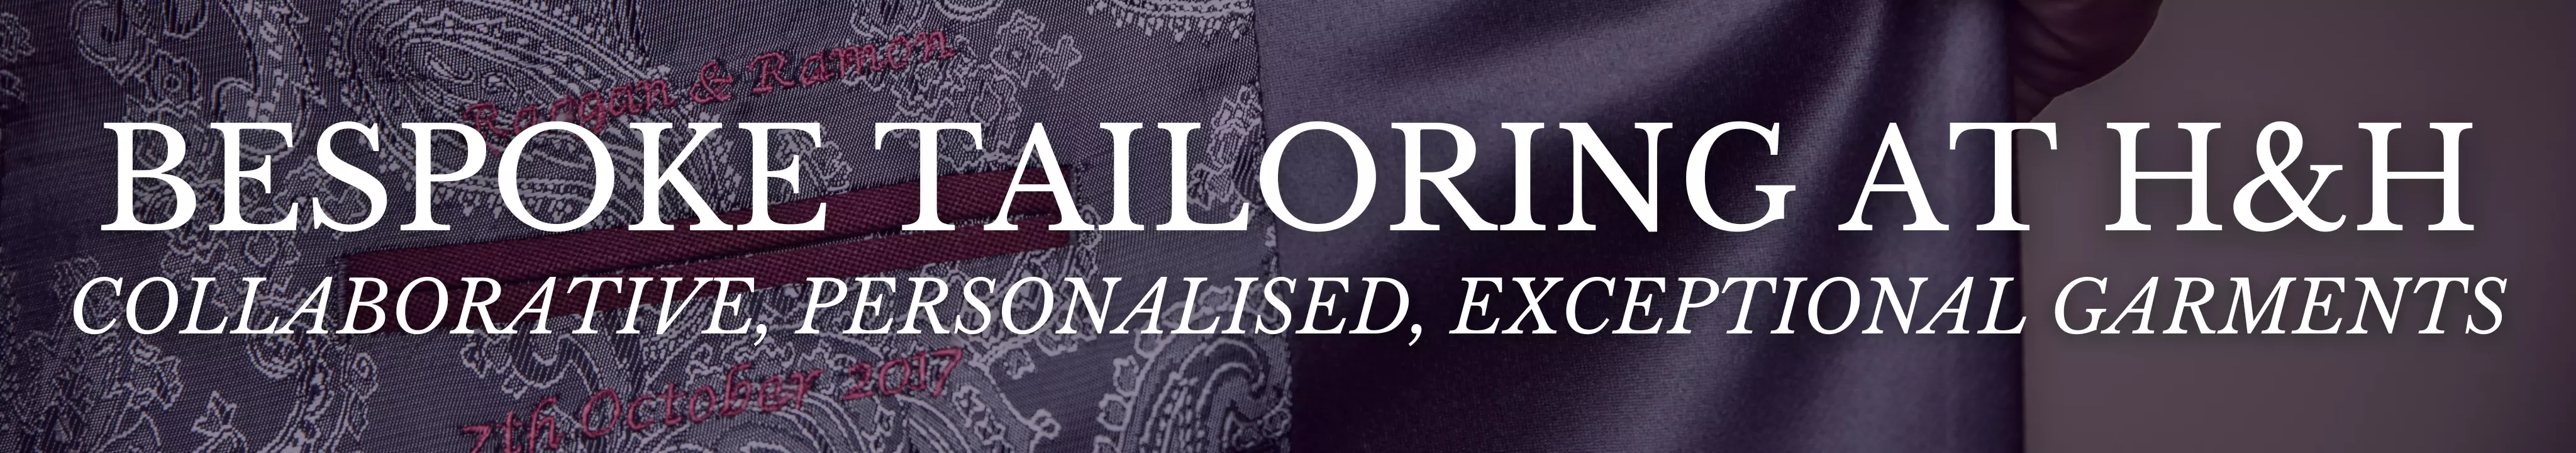 Bespoke tailoring at Harris & Howard. Collaborative, personalised, exceptional garments.